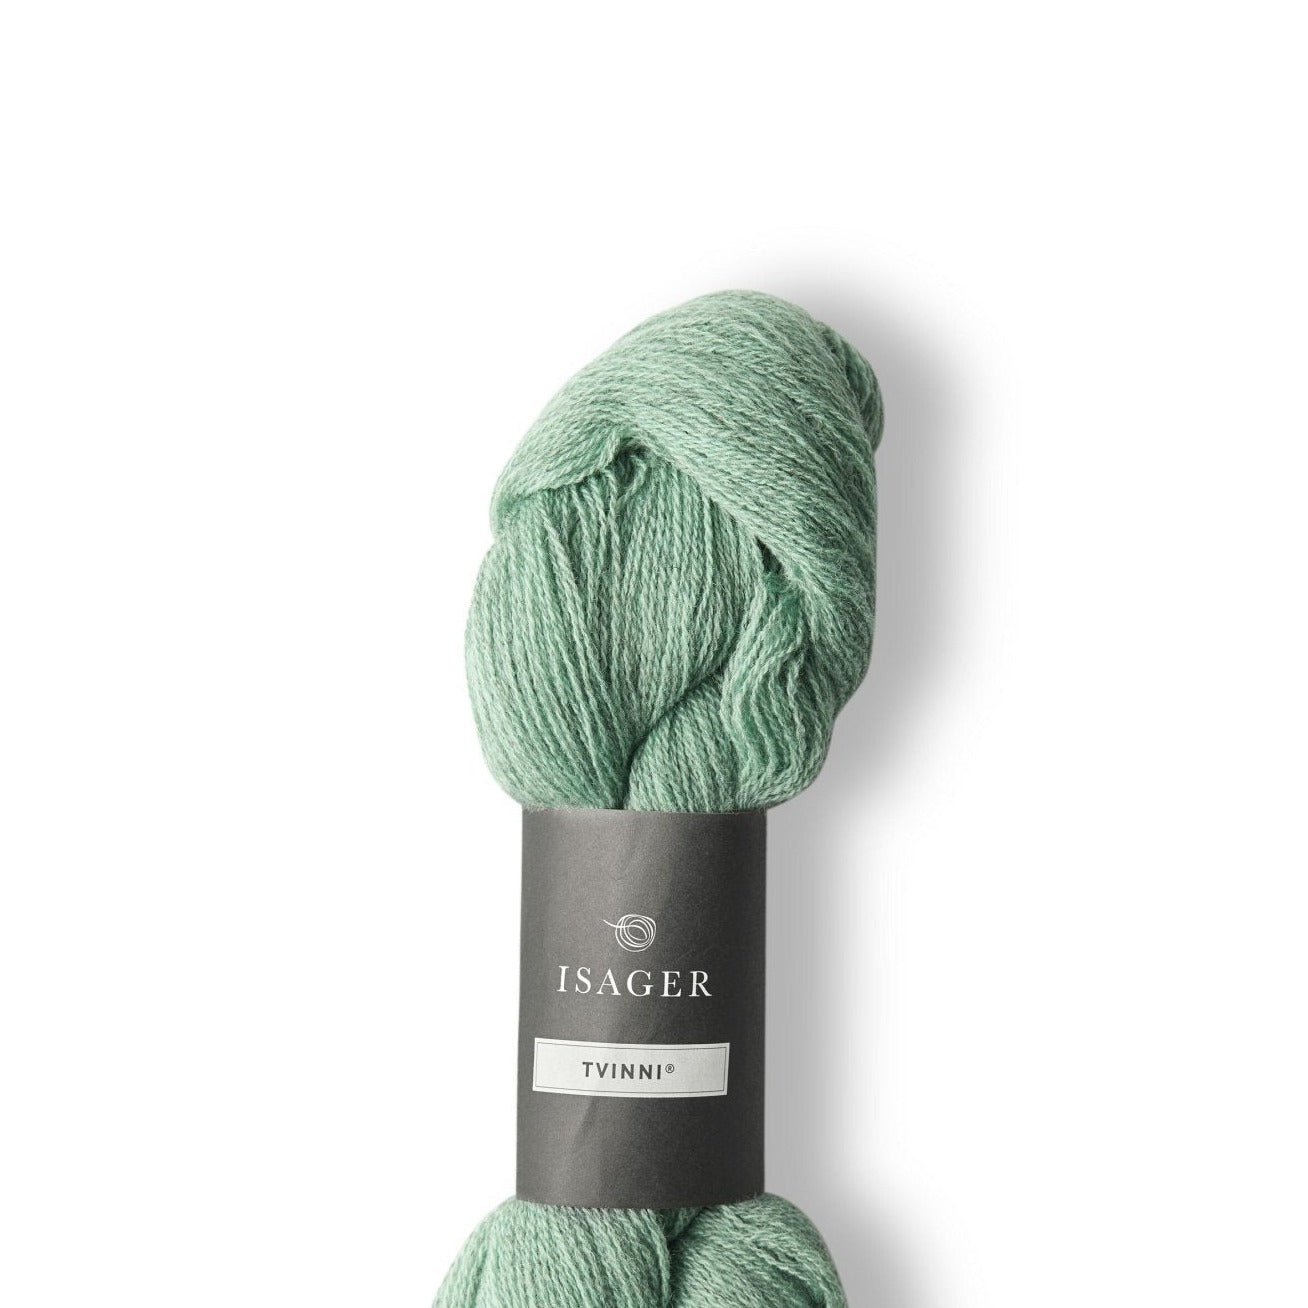 Isager Tvinni - 46s - 4 Ply - Isager - The Little Yarn Store